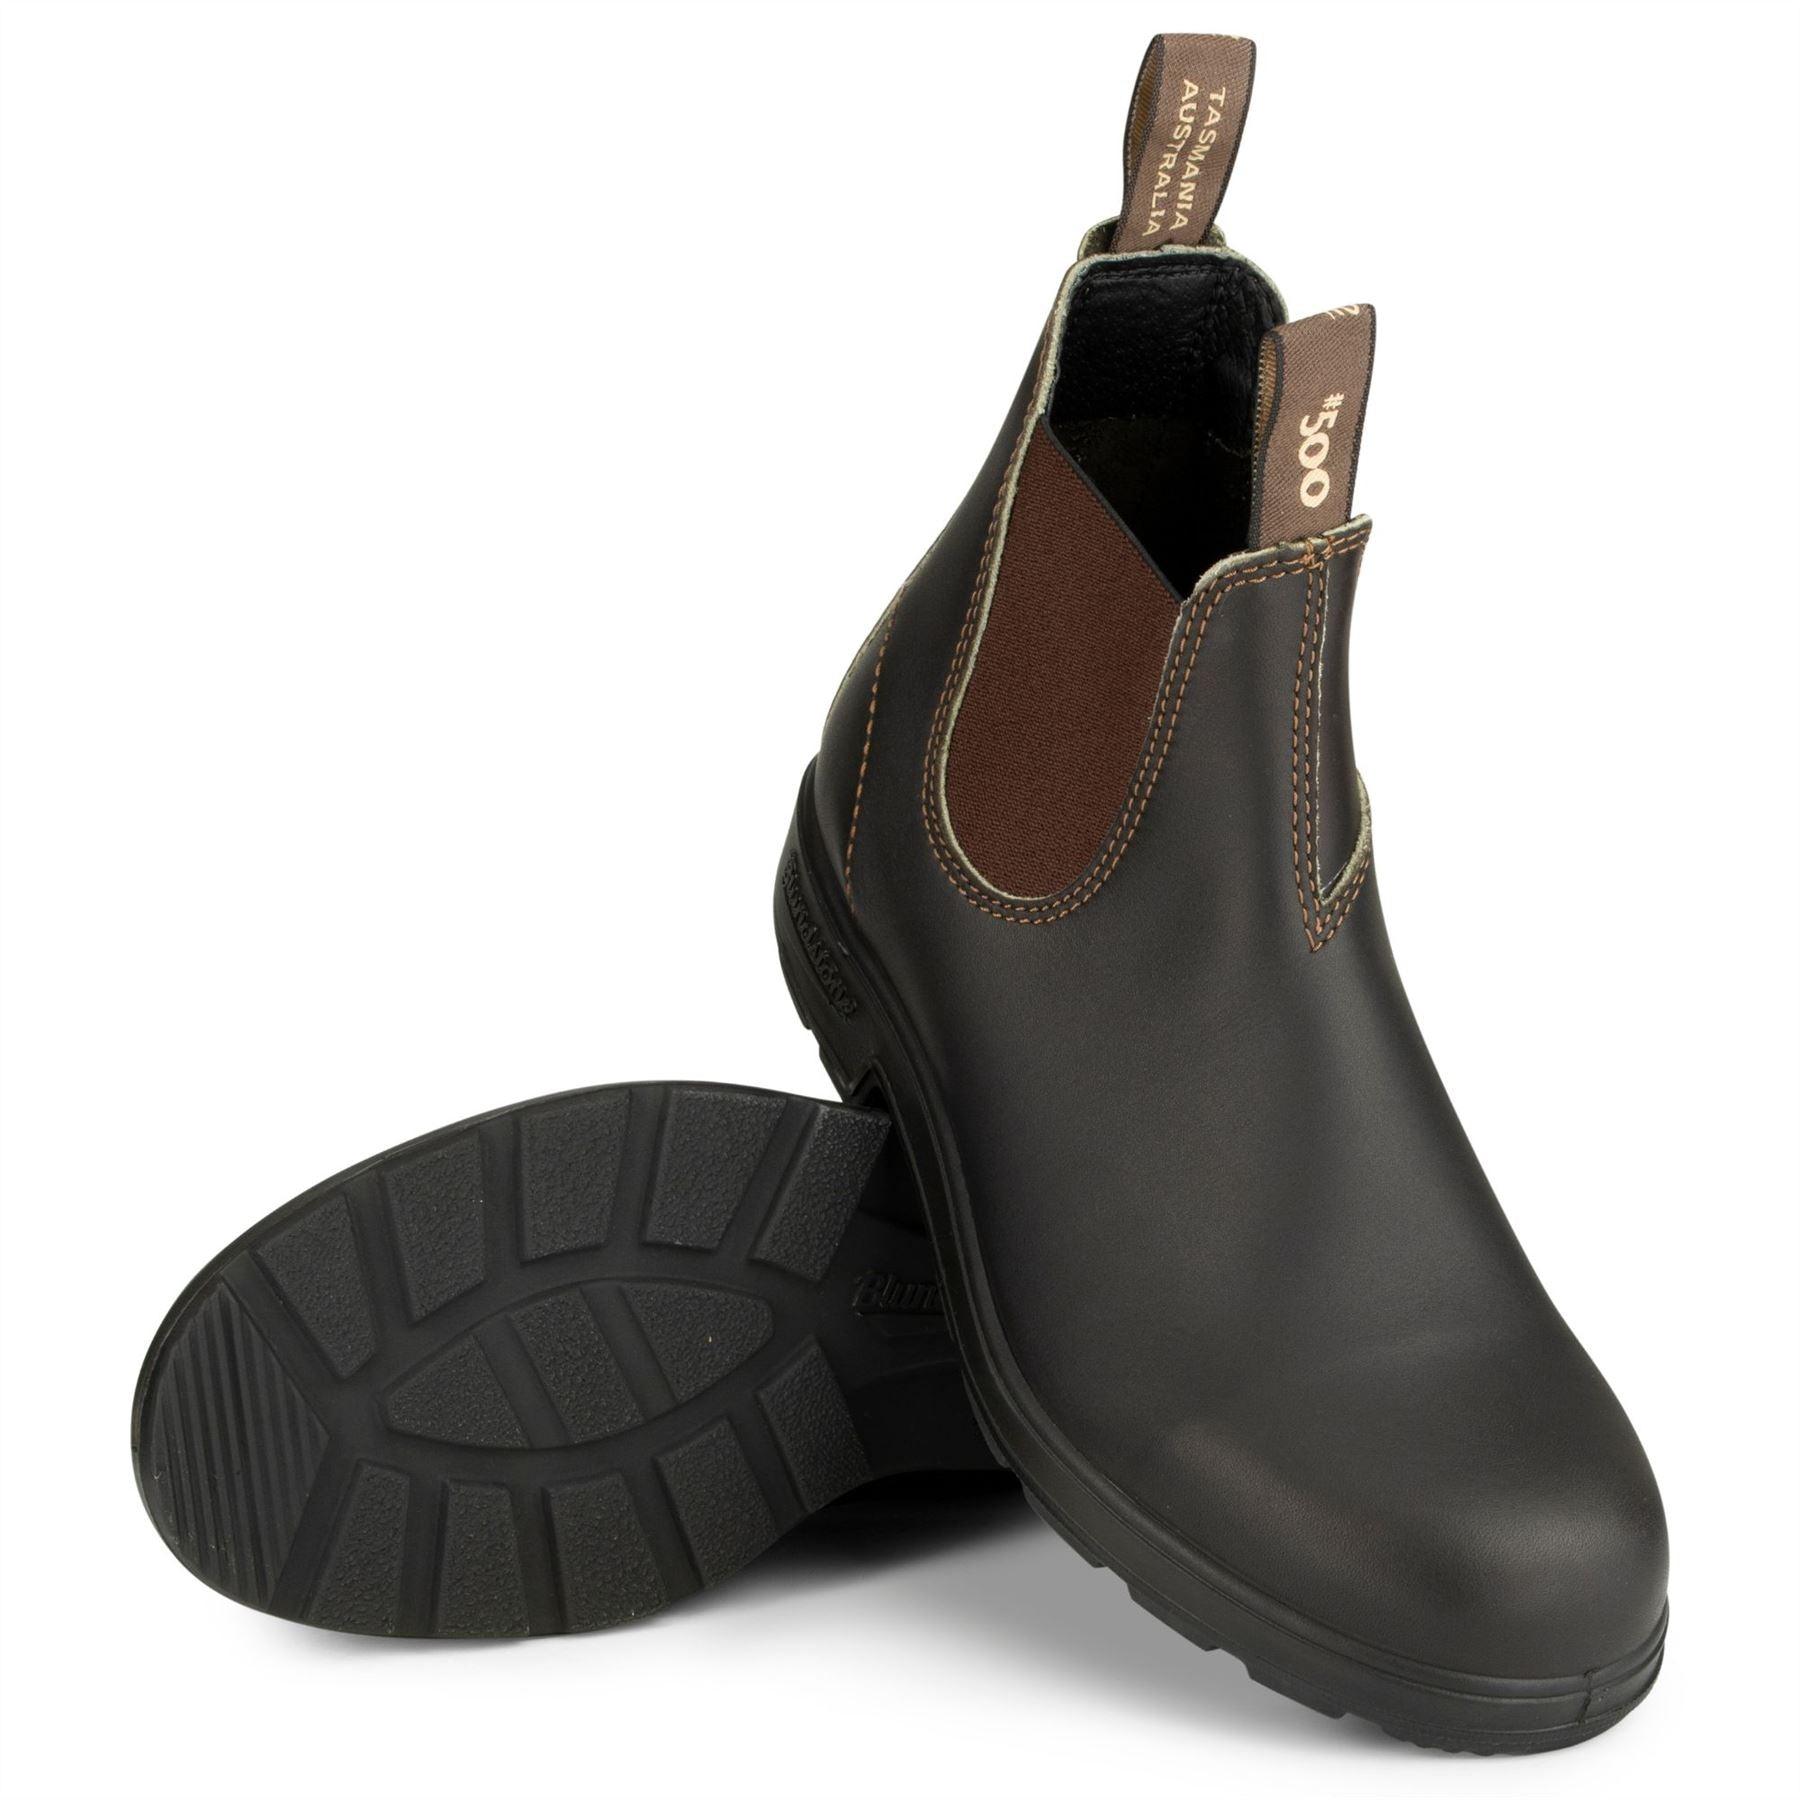 Blundstone 500 Stout Brown Chelsea Boots - Knighthood Store